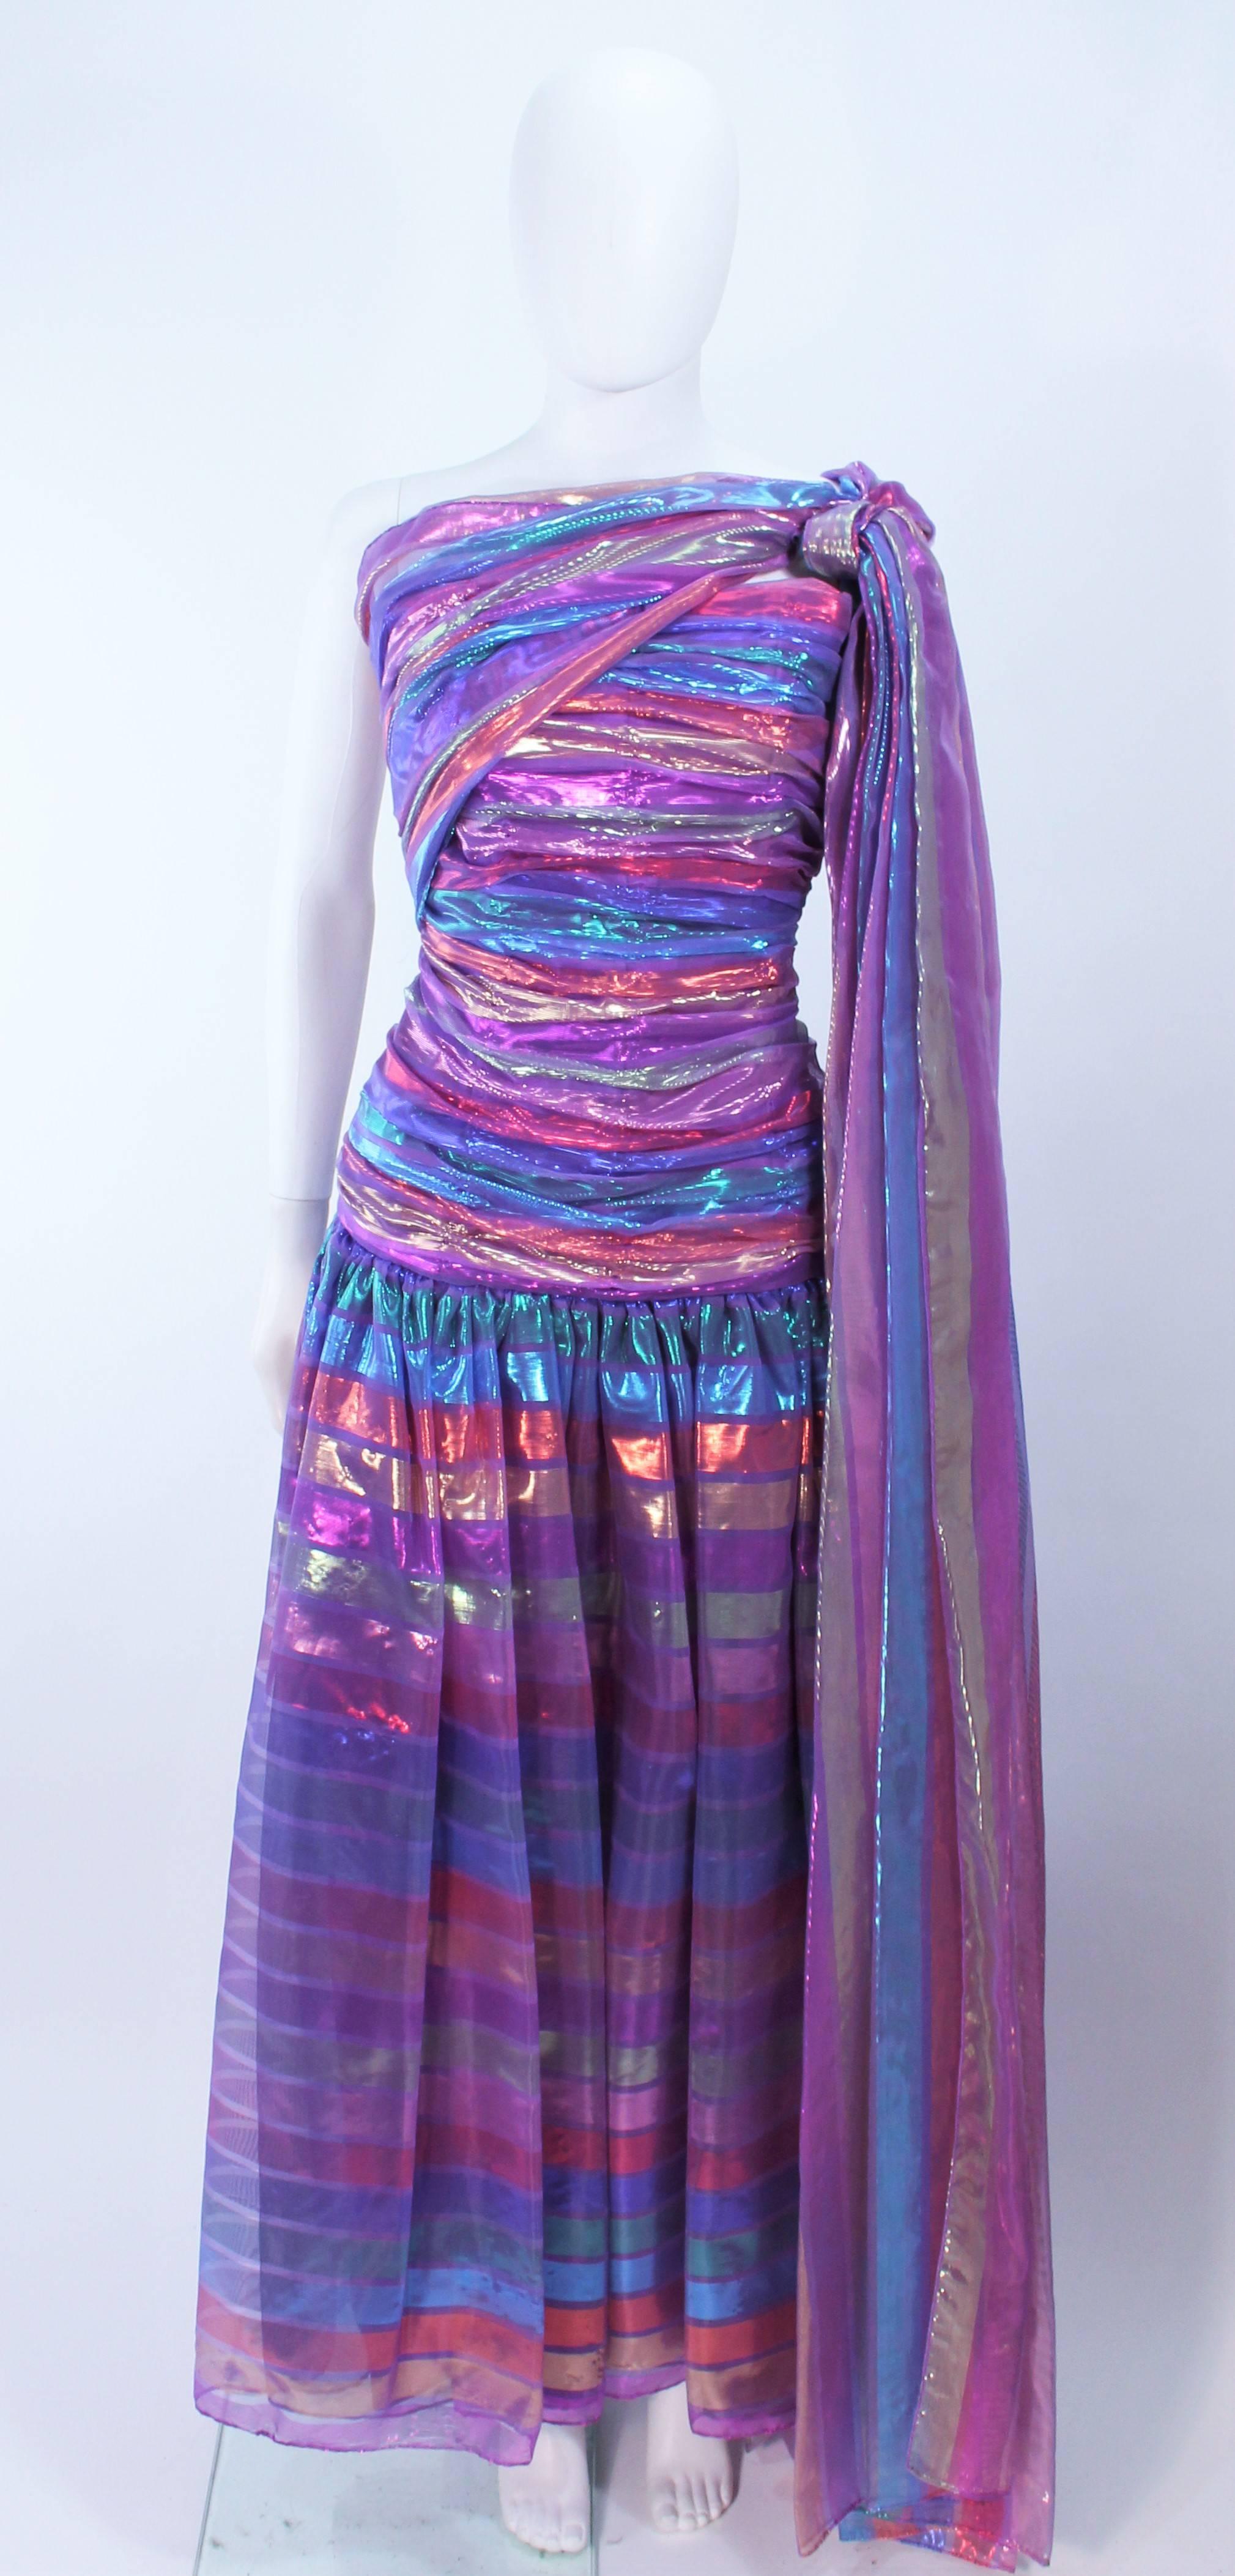 This Victor Costa gown is composed of a iridescent rainbow lame. Features a shoulder drape and ruching. There is a center back zipper closure with interior boning. In excellent vintage condition.

**Please cross-reference measurements for personal